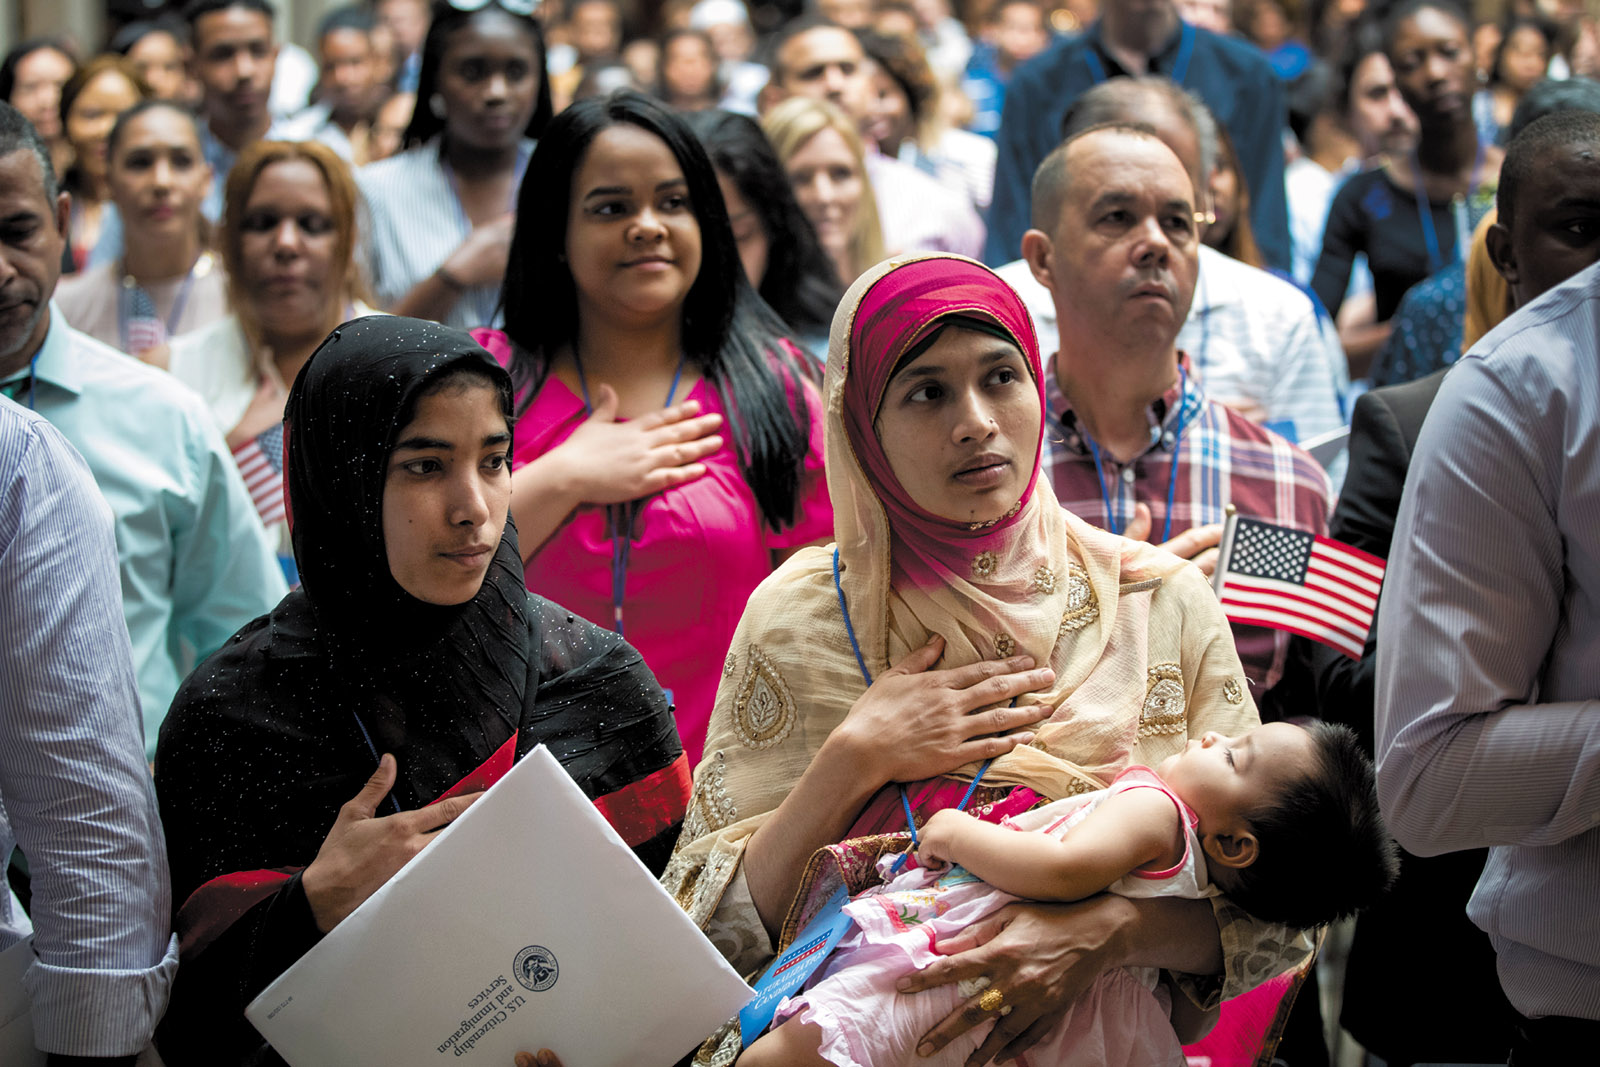 Mosammat Rasheda Akter (center), originally from Bangladesh, reciting the Pledge of Allegiance while holding her daughter after becoming a US citizen during a naturalization ceremony at the New York Public Library, July 2018